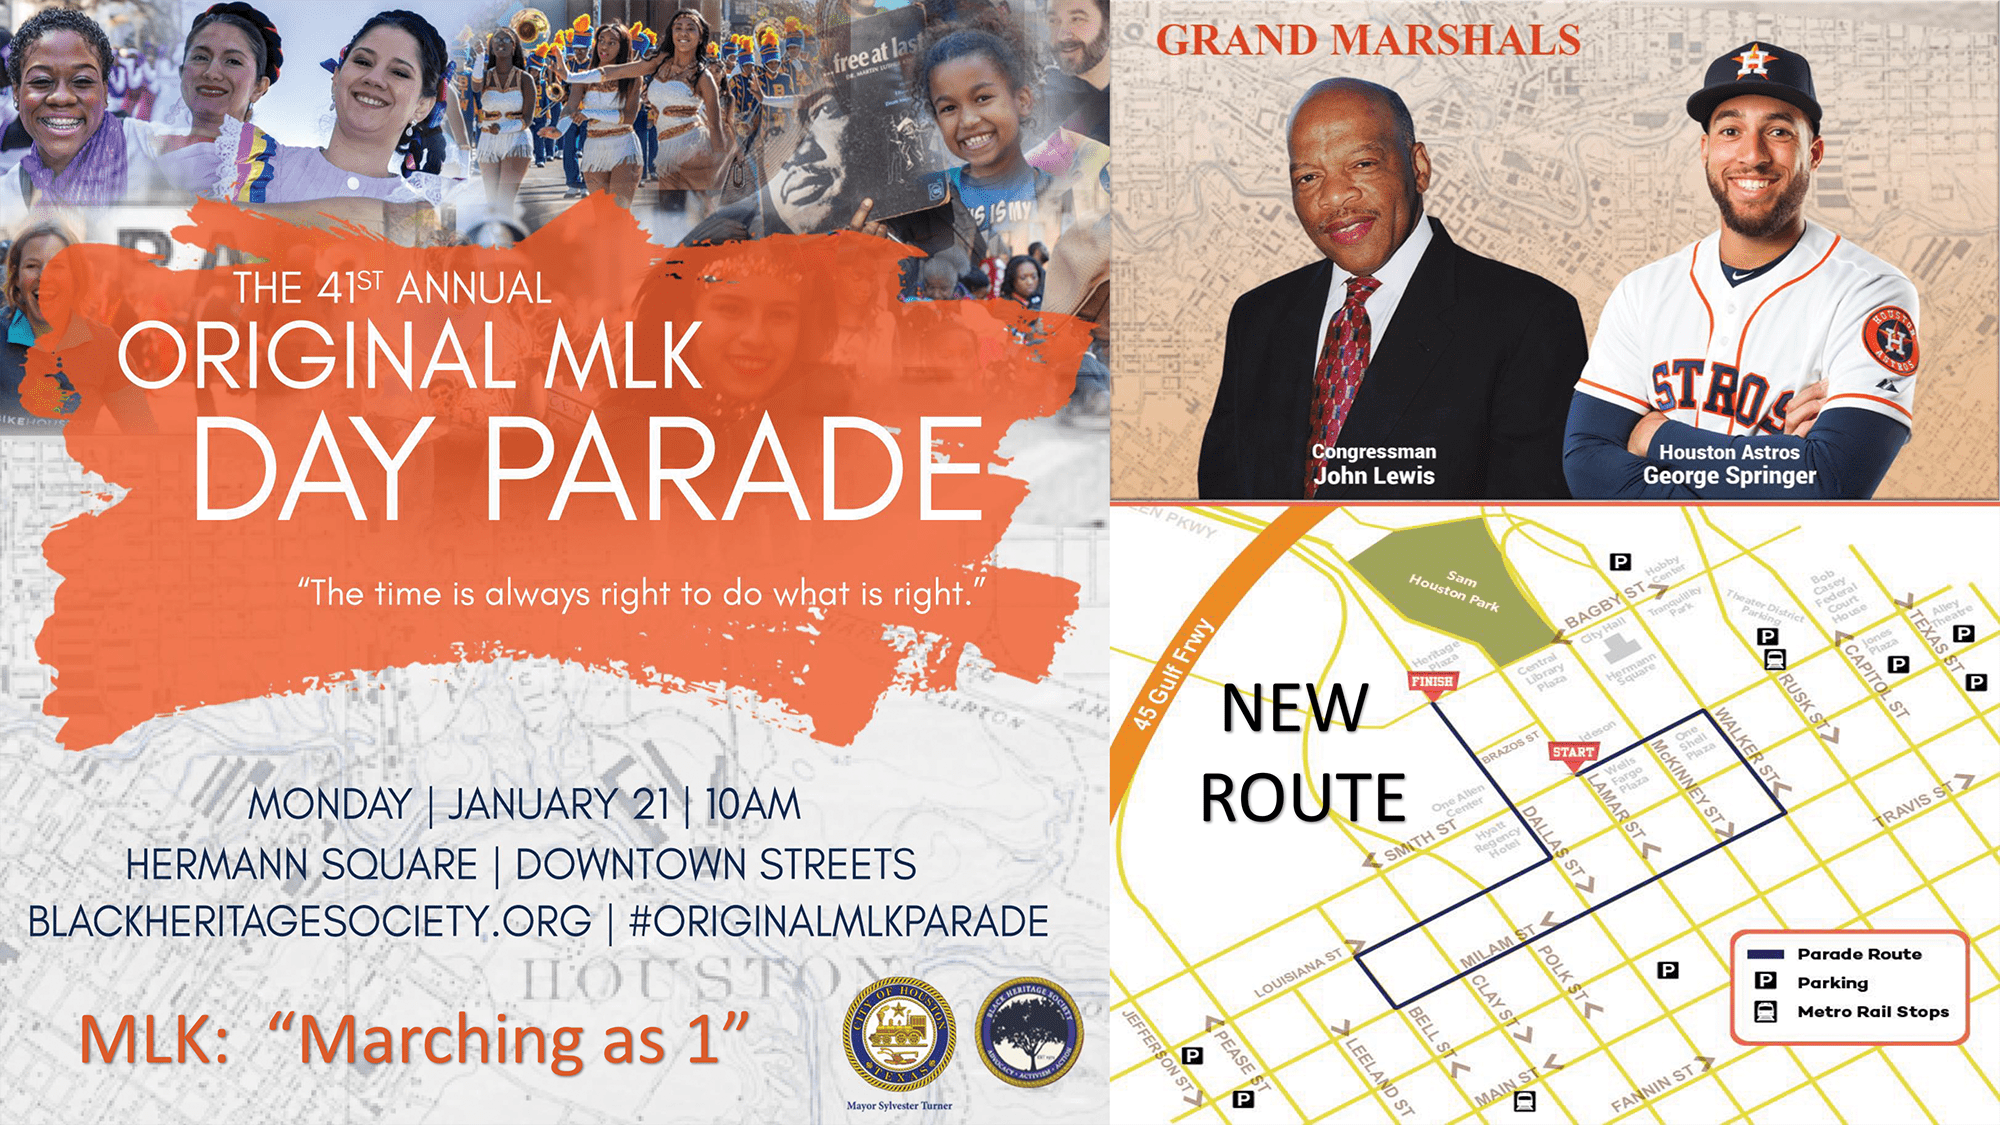 City of Houston Begins New MLK Day Tradition 41ST Annual Original MLK Day Parade will Unite Houstonians